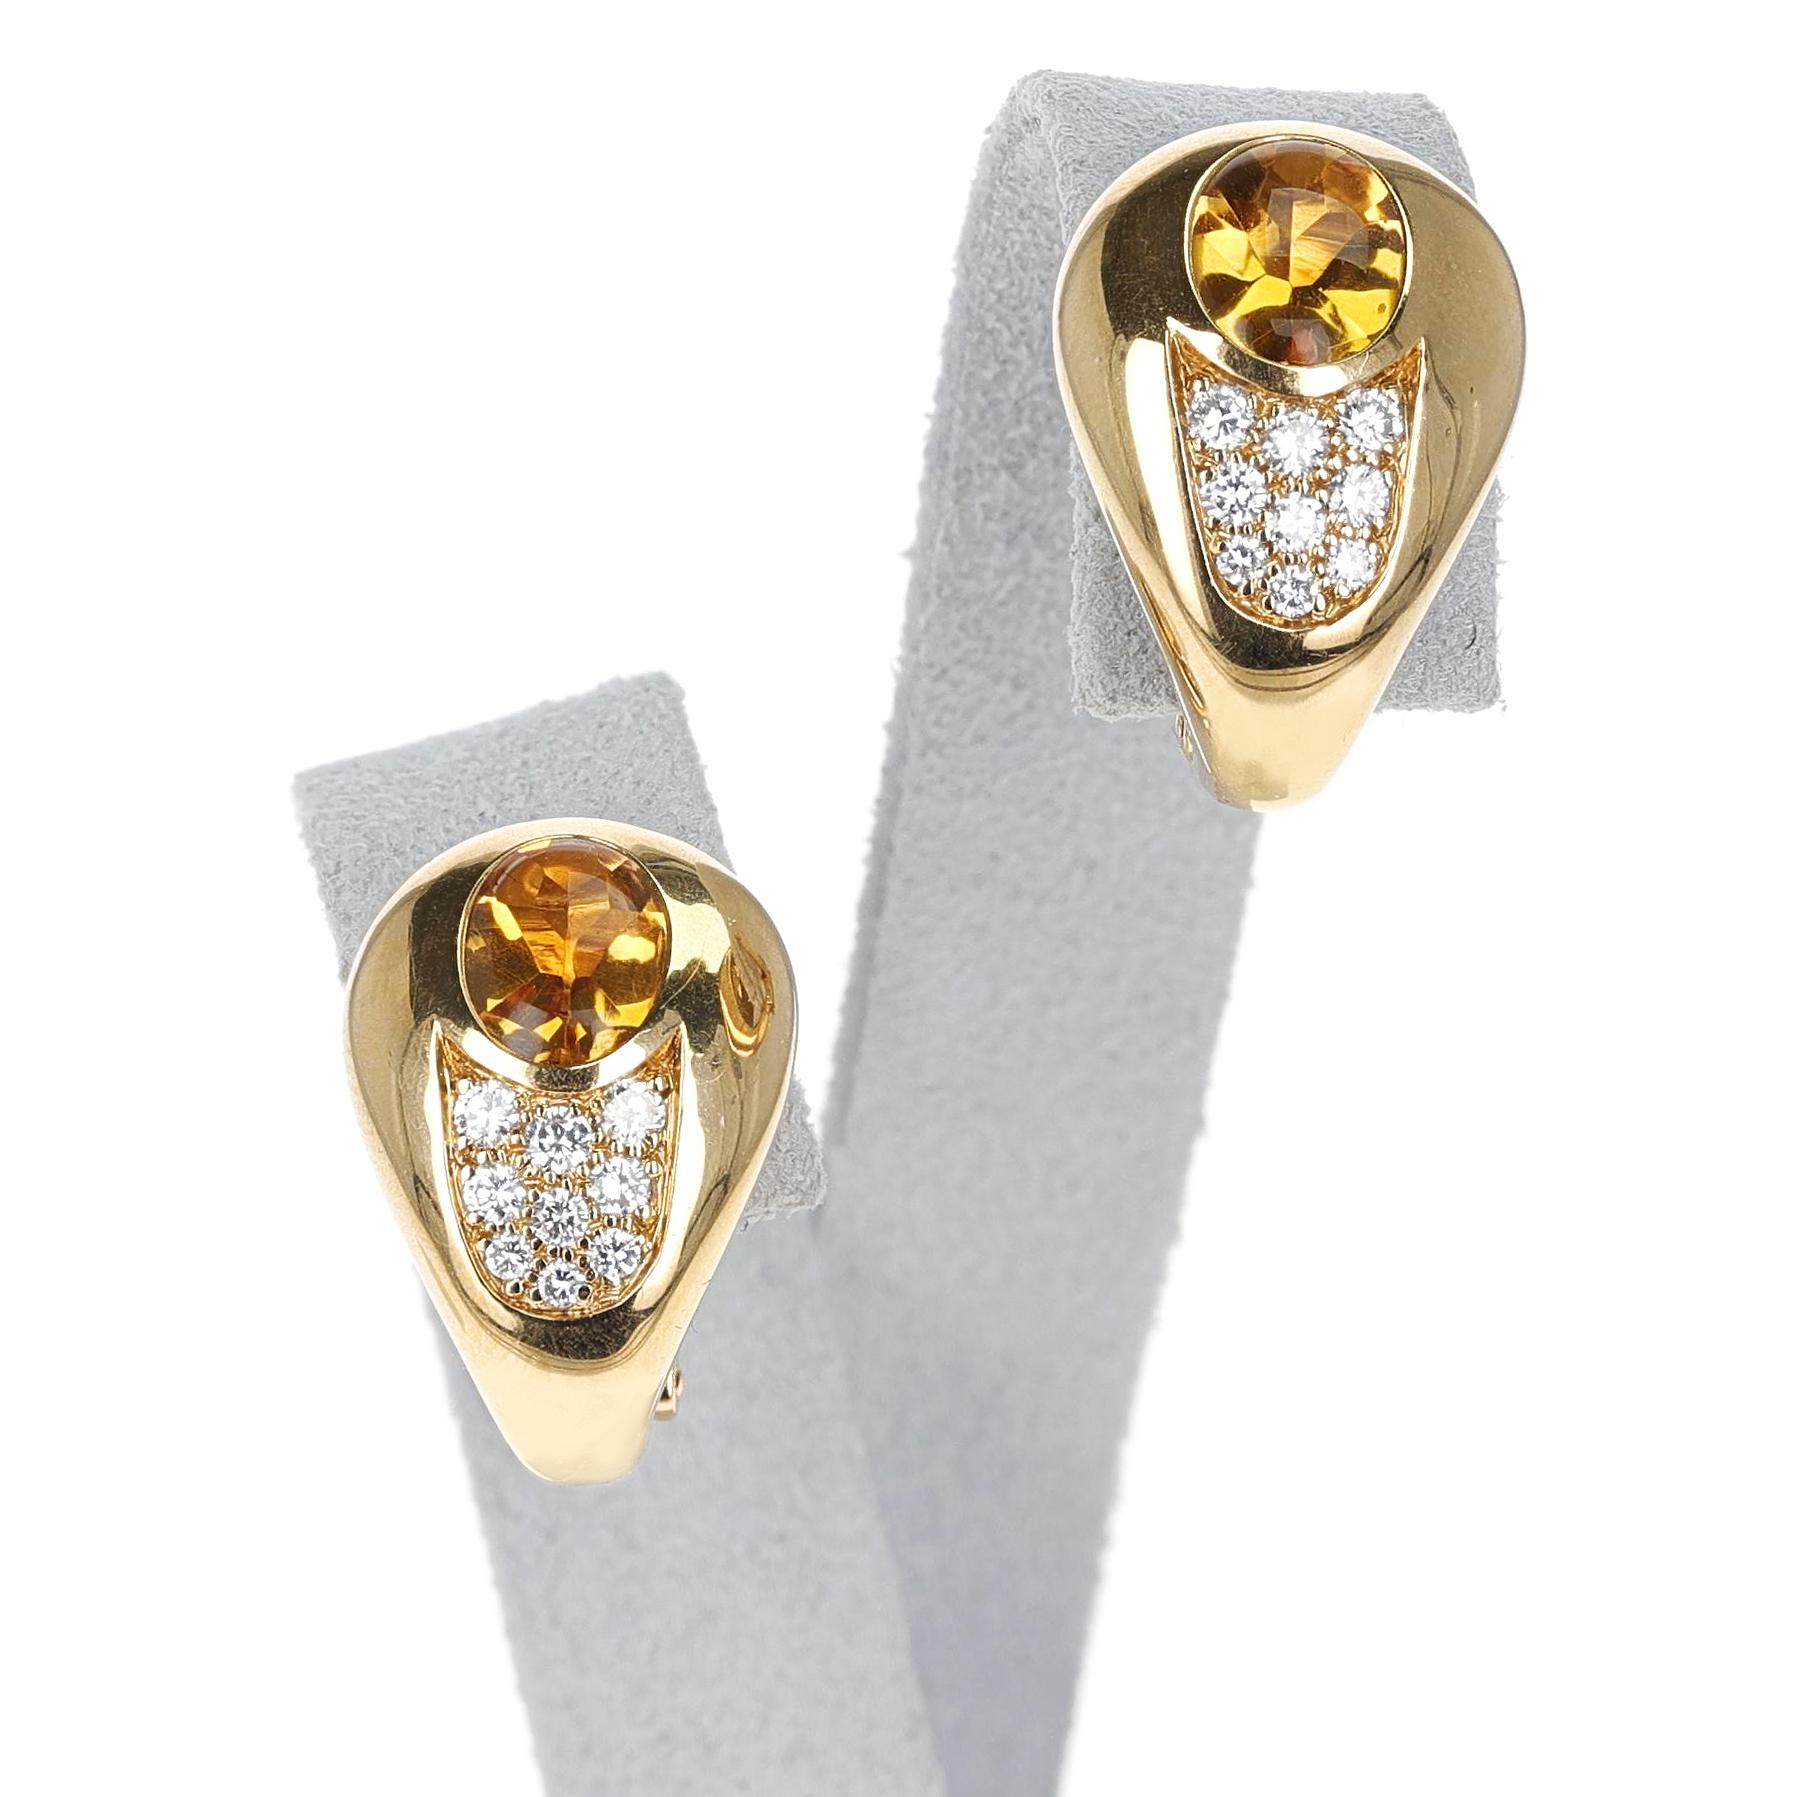 Mauboussin 2.18 ct. Citrine and 0.42 ct. Diamond Earrings, 18K Gold For Sale 4